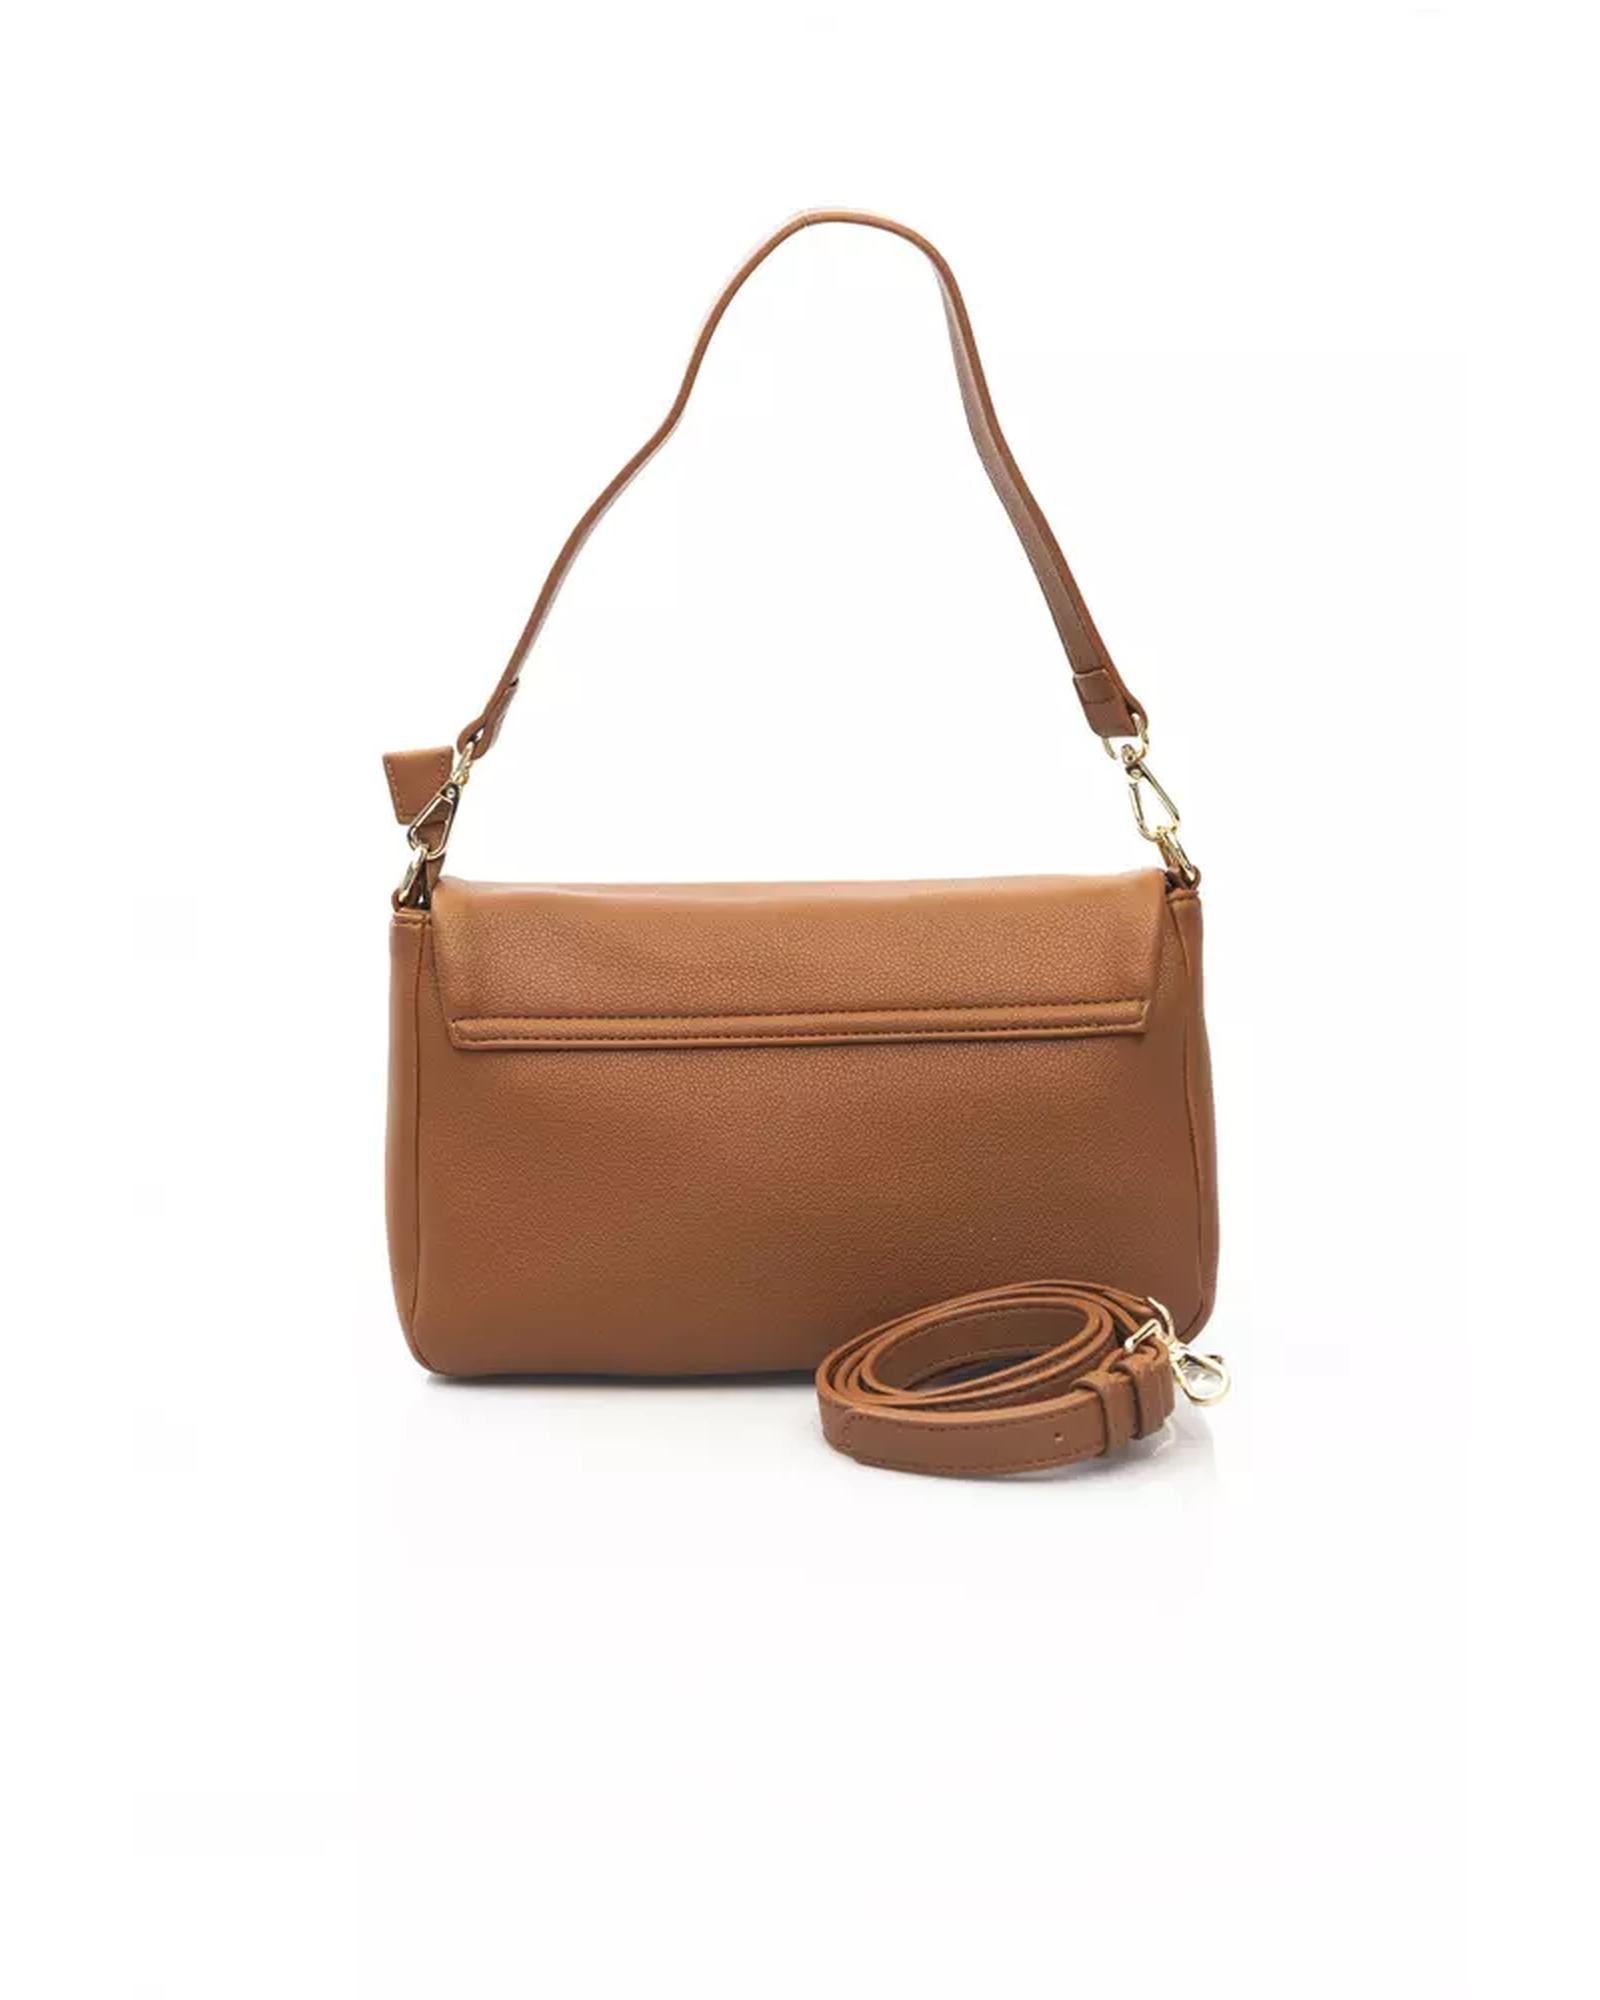 Flap Closure Shoulder Bag with Internal Compartments and Golden Details One Size Women